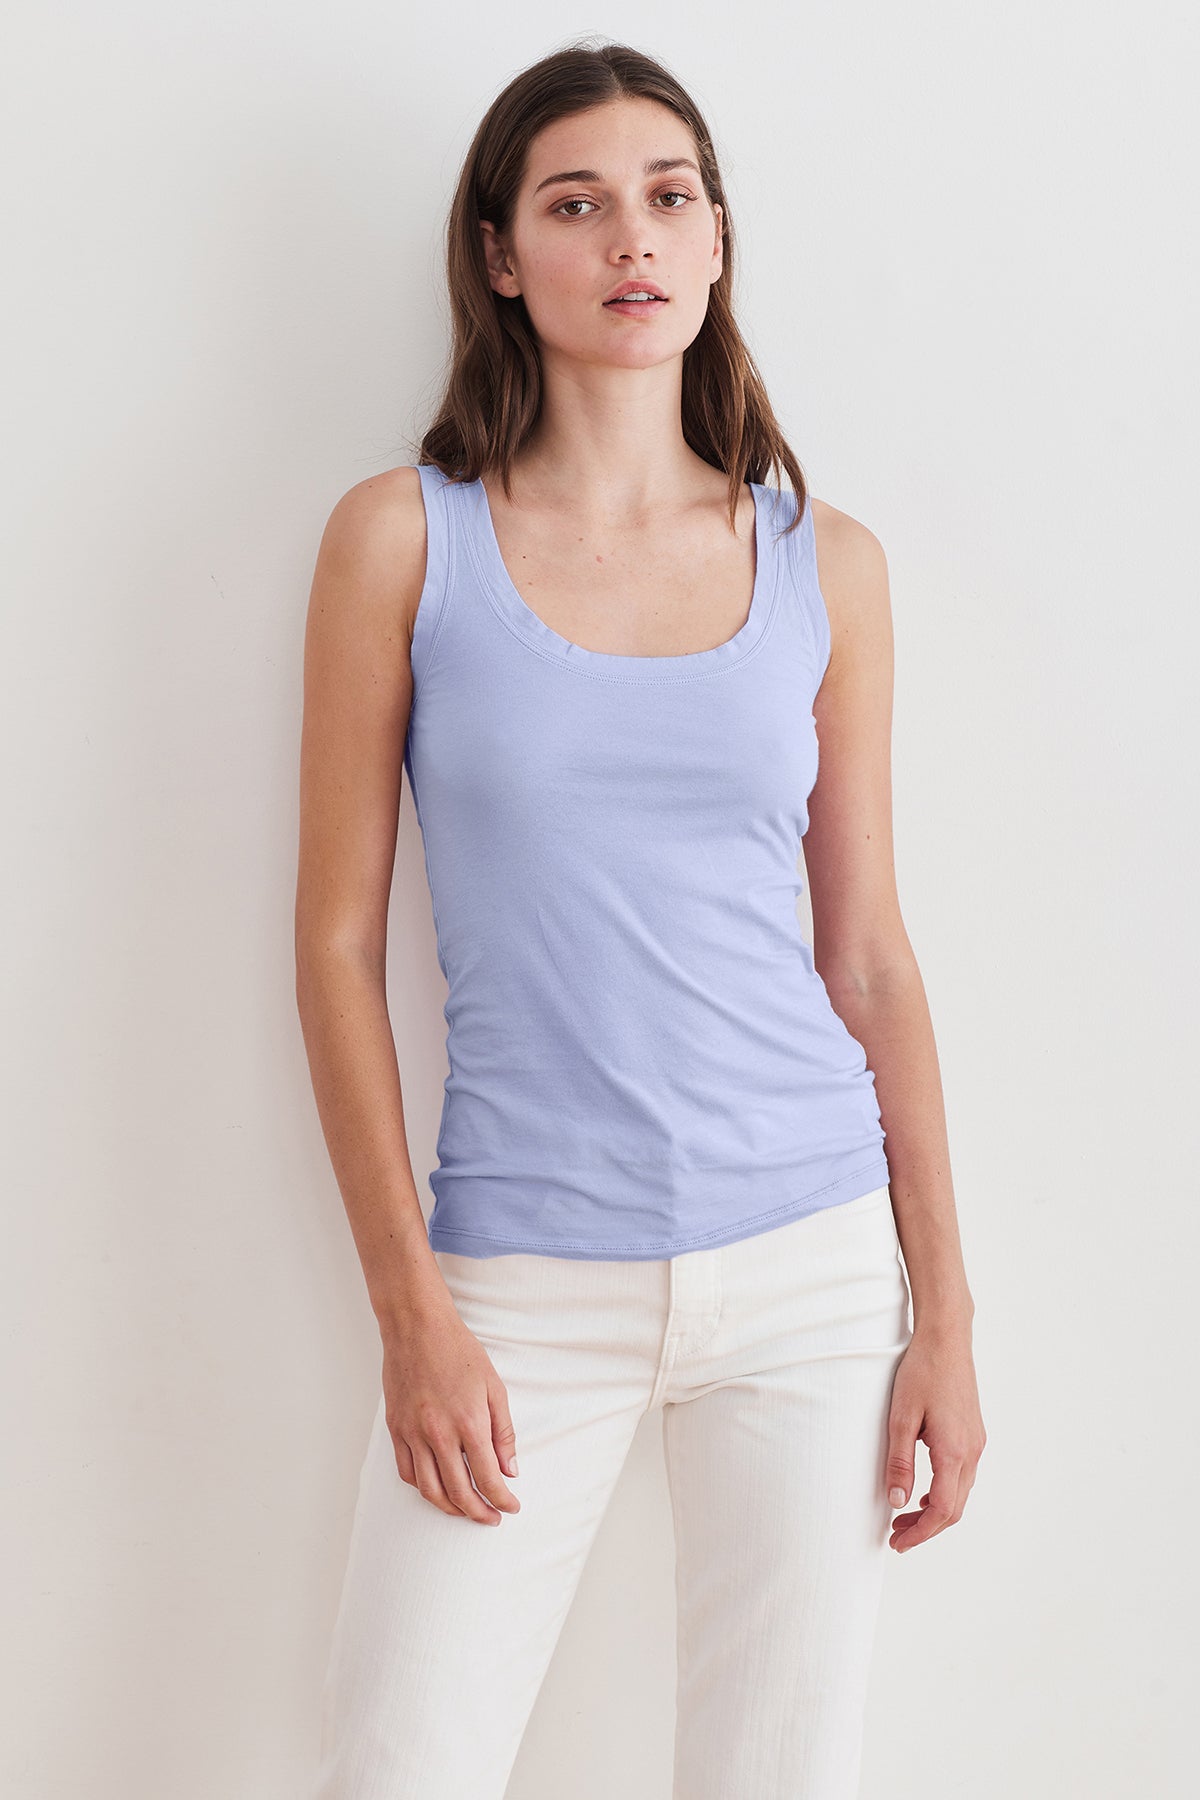 A woman wearing a Velvet by Graham & Spencer MOSSY GAUZY WHISPER FITTED TANK, complemented with white jeans.-23854475215041